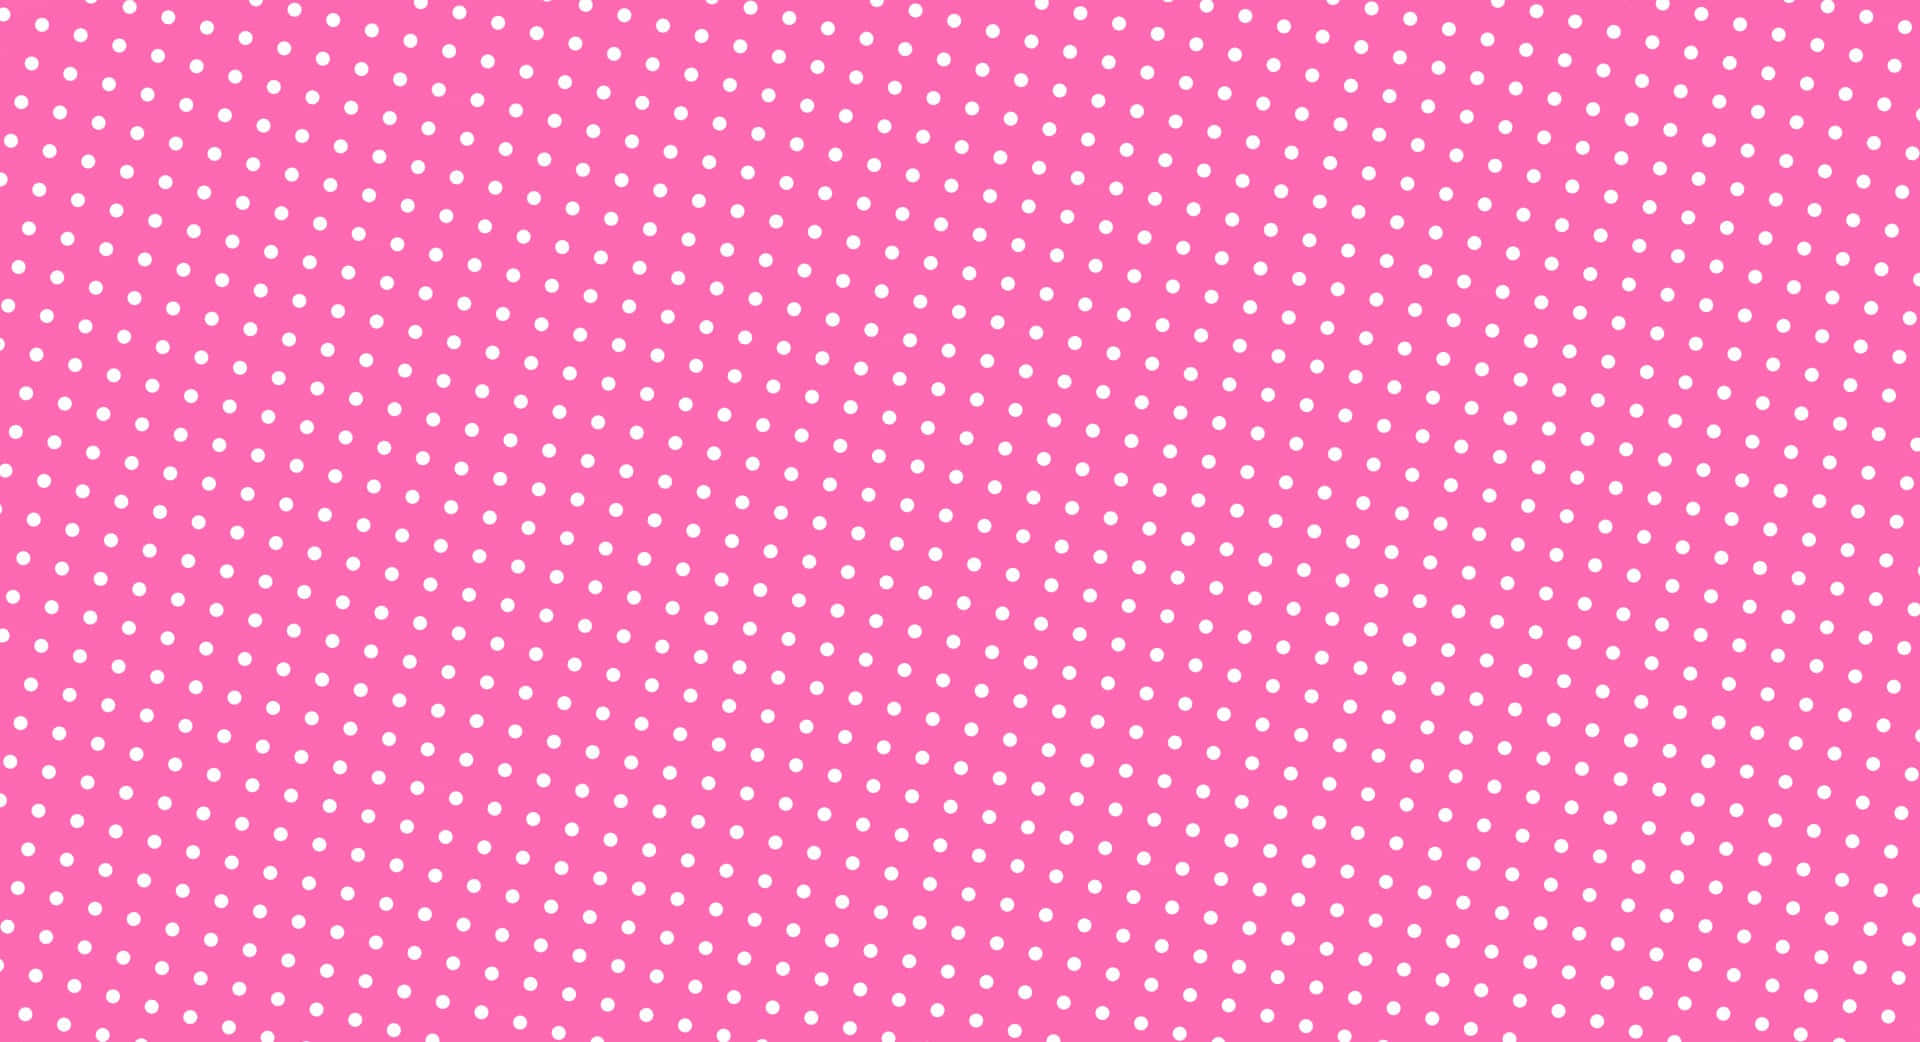 A Pink Background With Dots On It Wallpaper